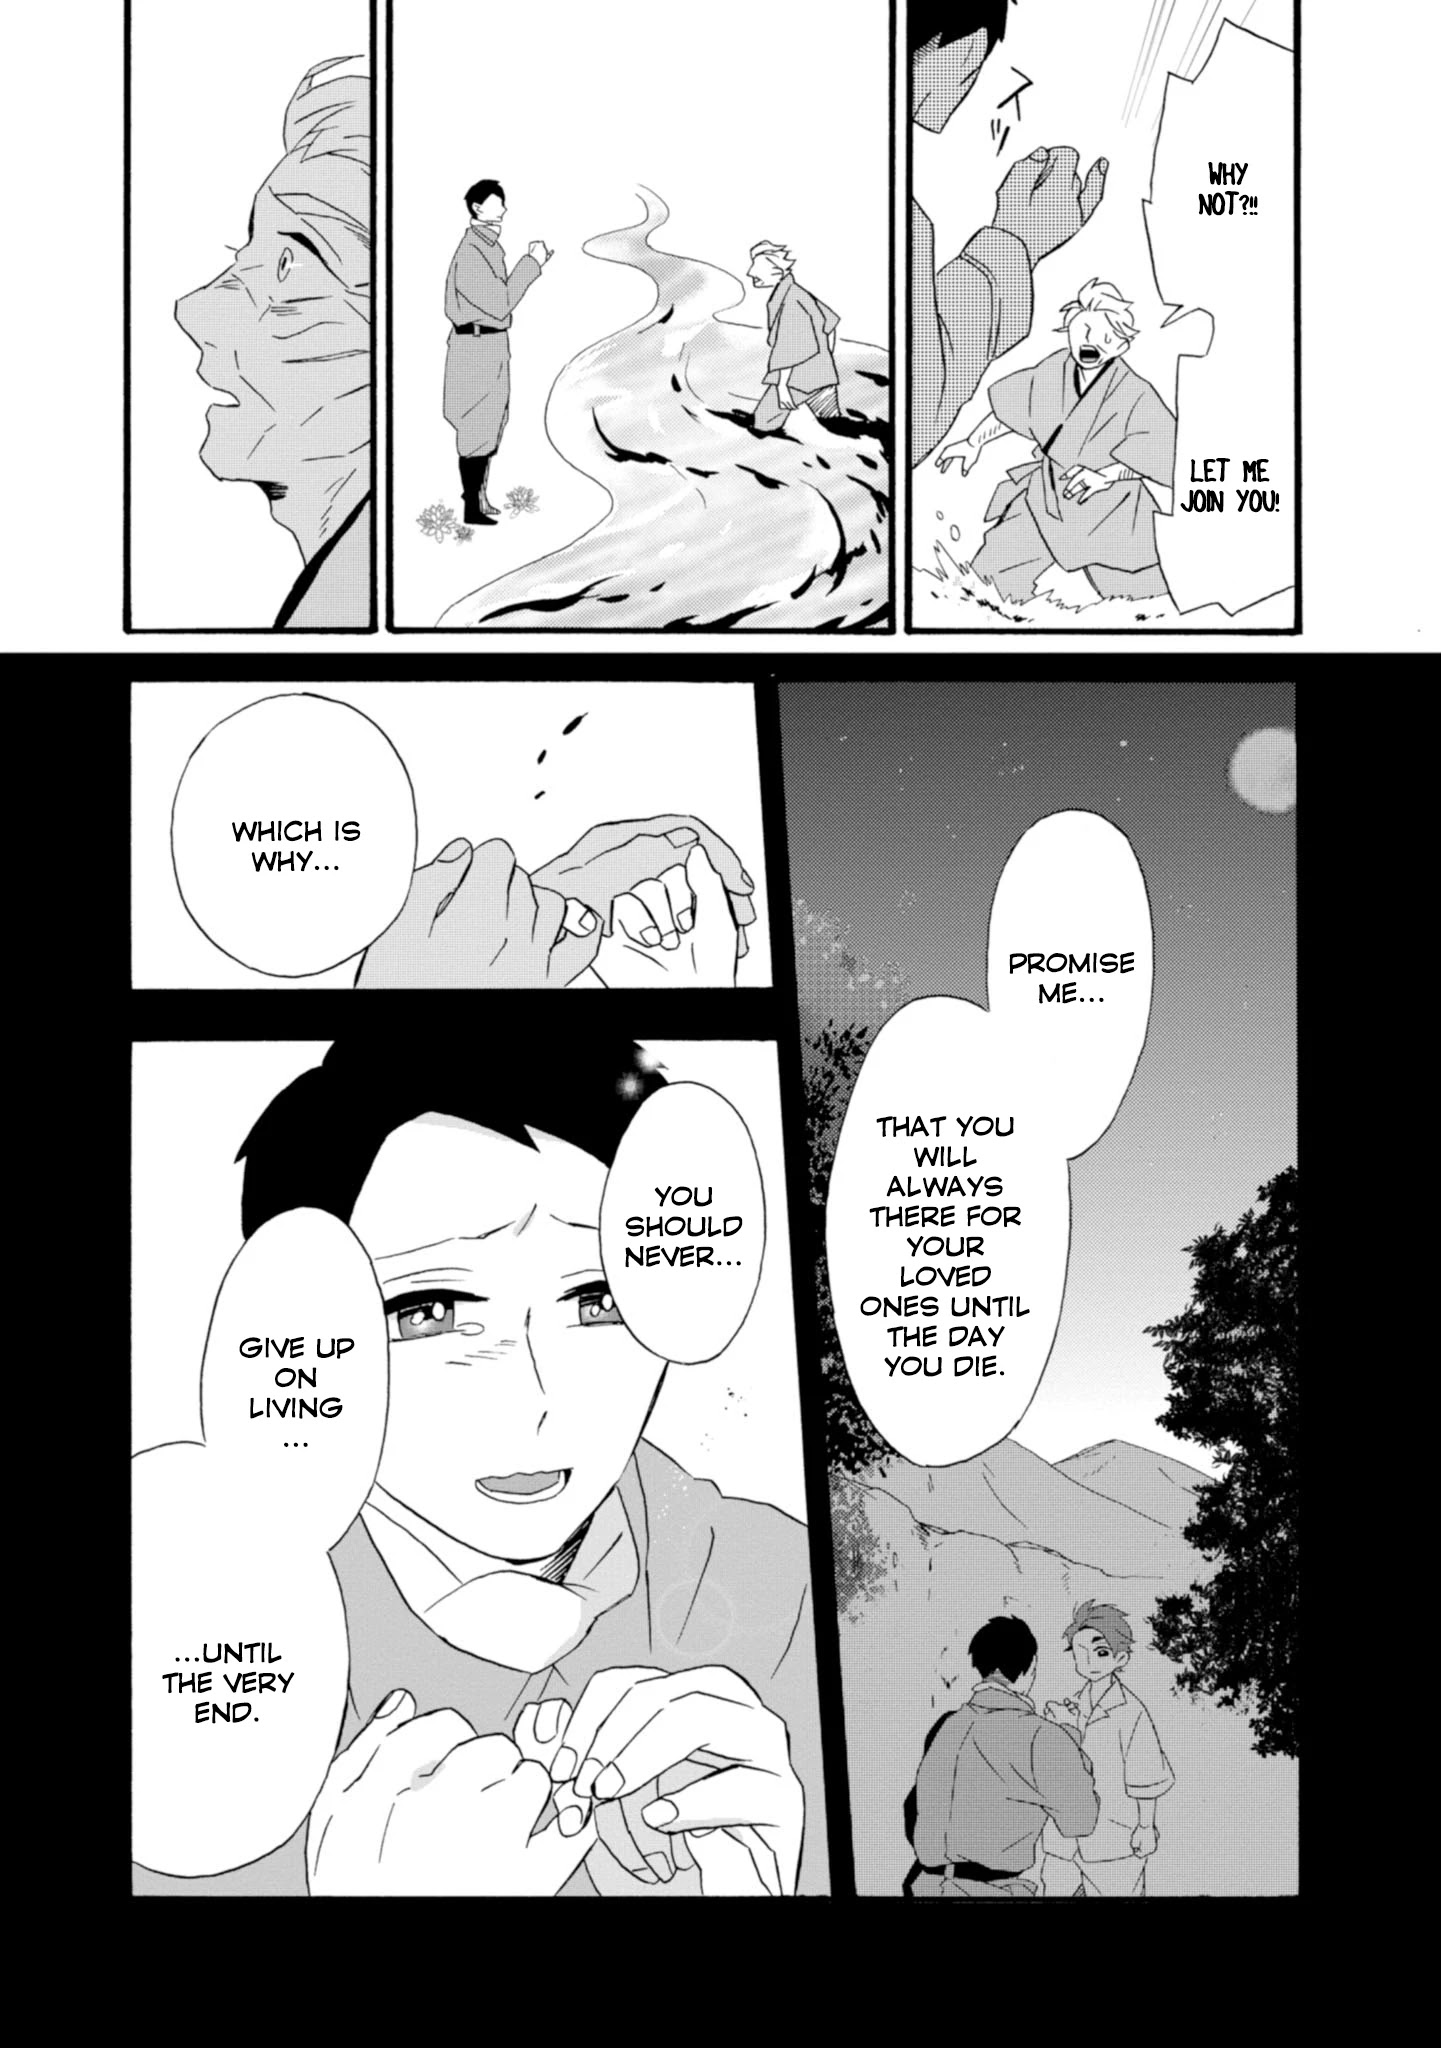 Will You Marry Me Again If You Are Reborn? - Page 3